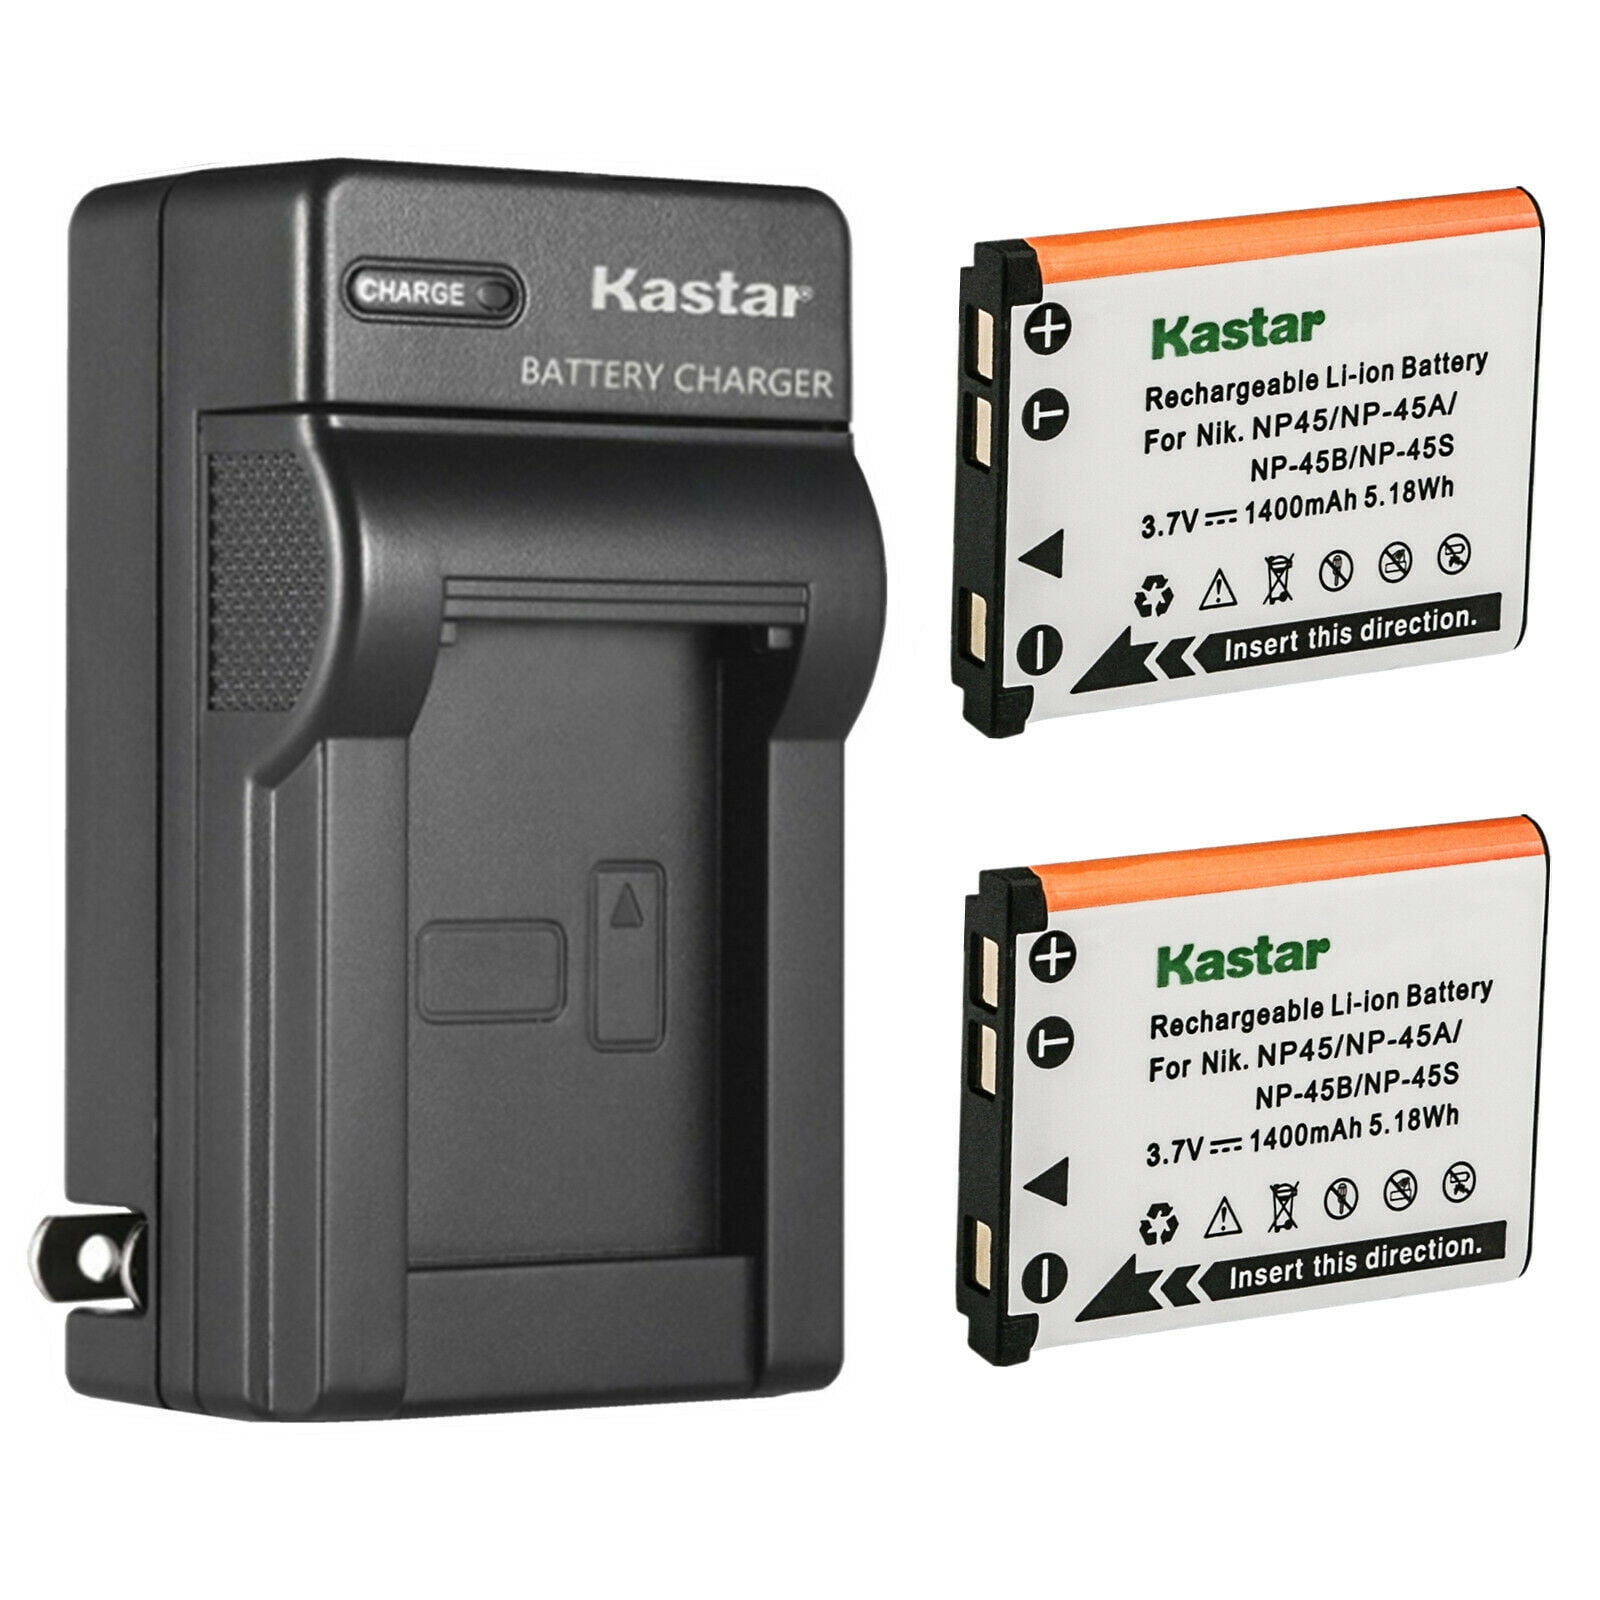 Kastar 2-Pack Battery and AC Wall Charger Replacement Fujifilm FinePix J10 FinePix J12 FinePix J15 FinePix J15fd FinePix J20 FinePix J25 FinePix J26 FinePix J27 FinePix J28 FinePix J29 Cameras -